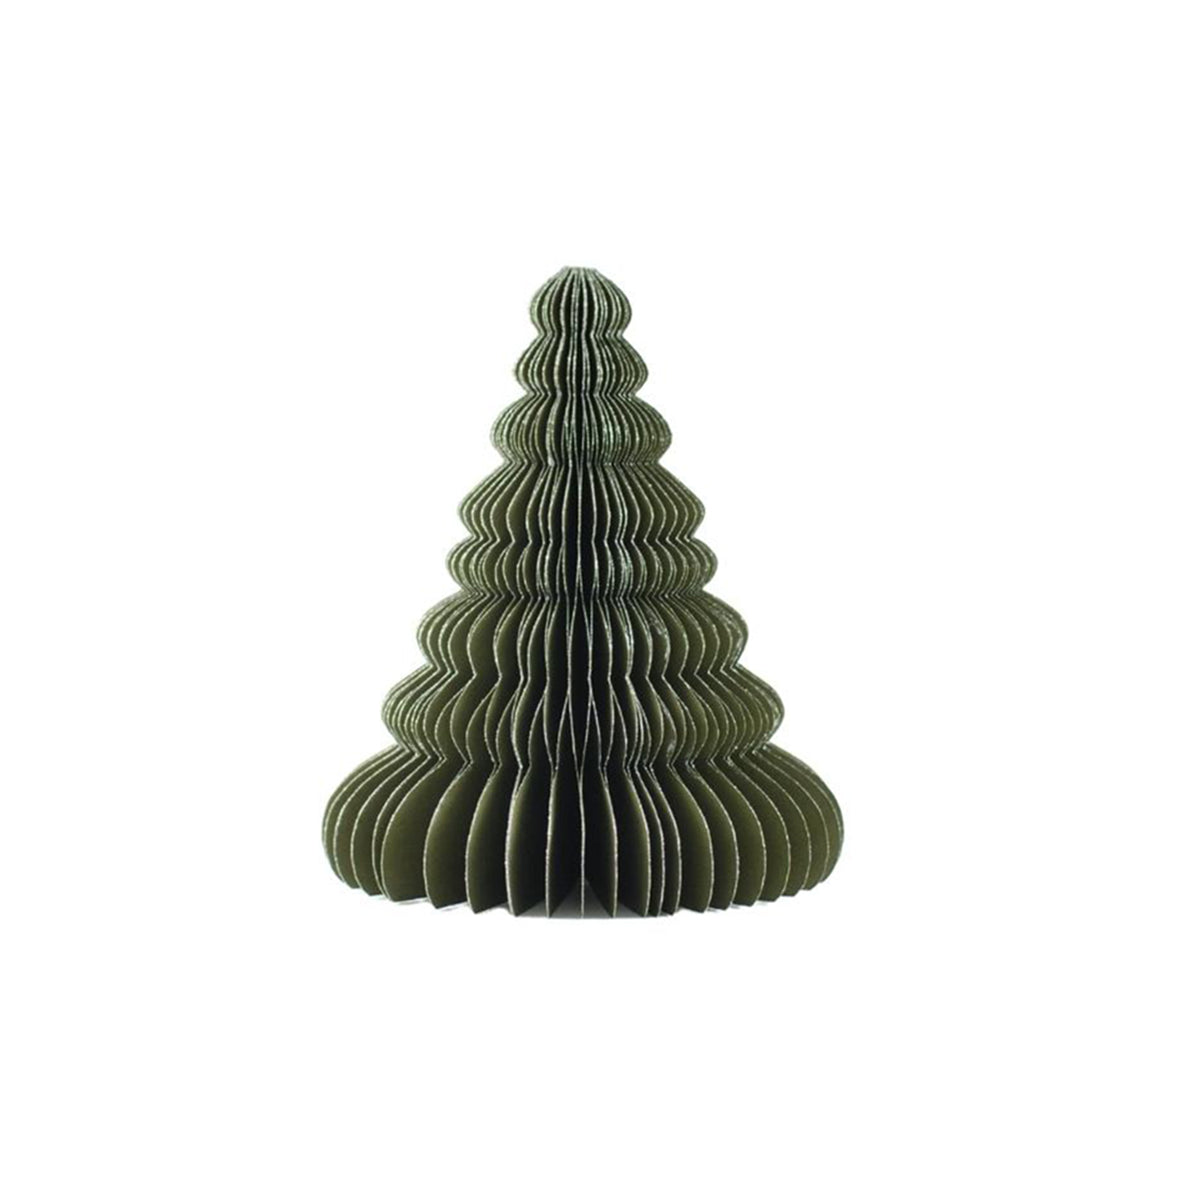 Paper Tree Standing Olive Green / Silver Edge 15cm